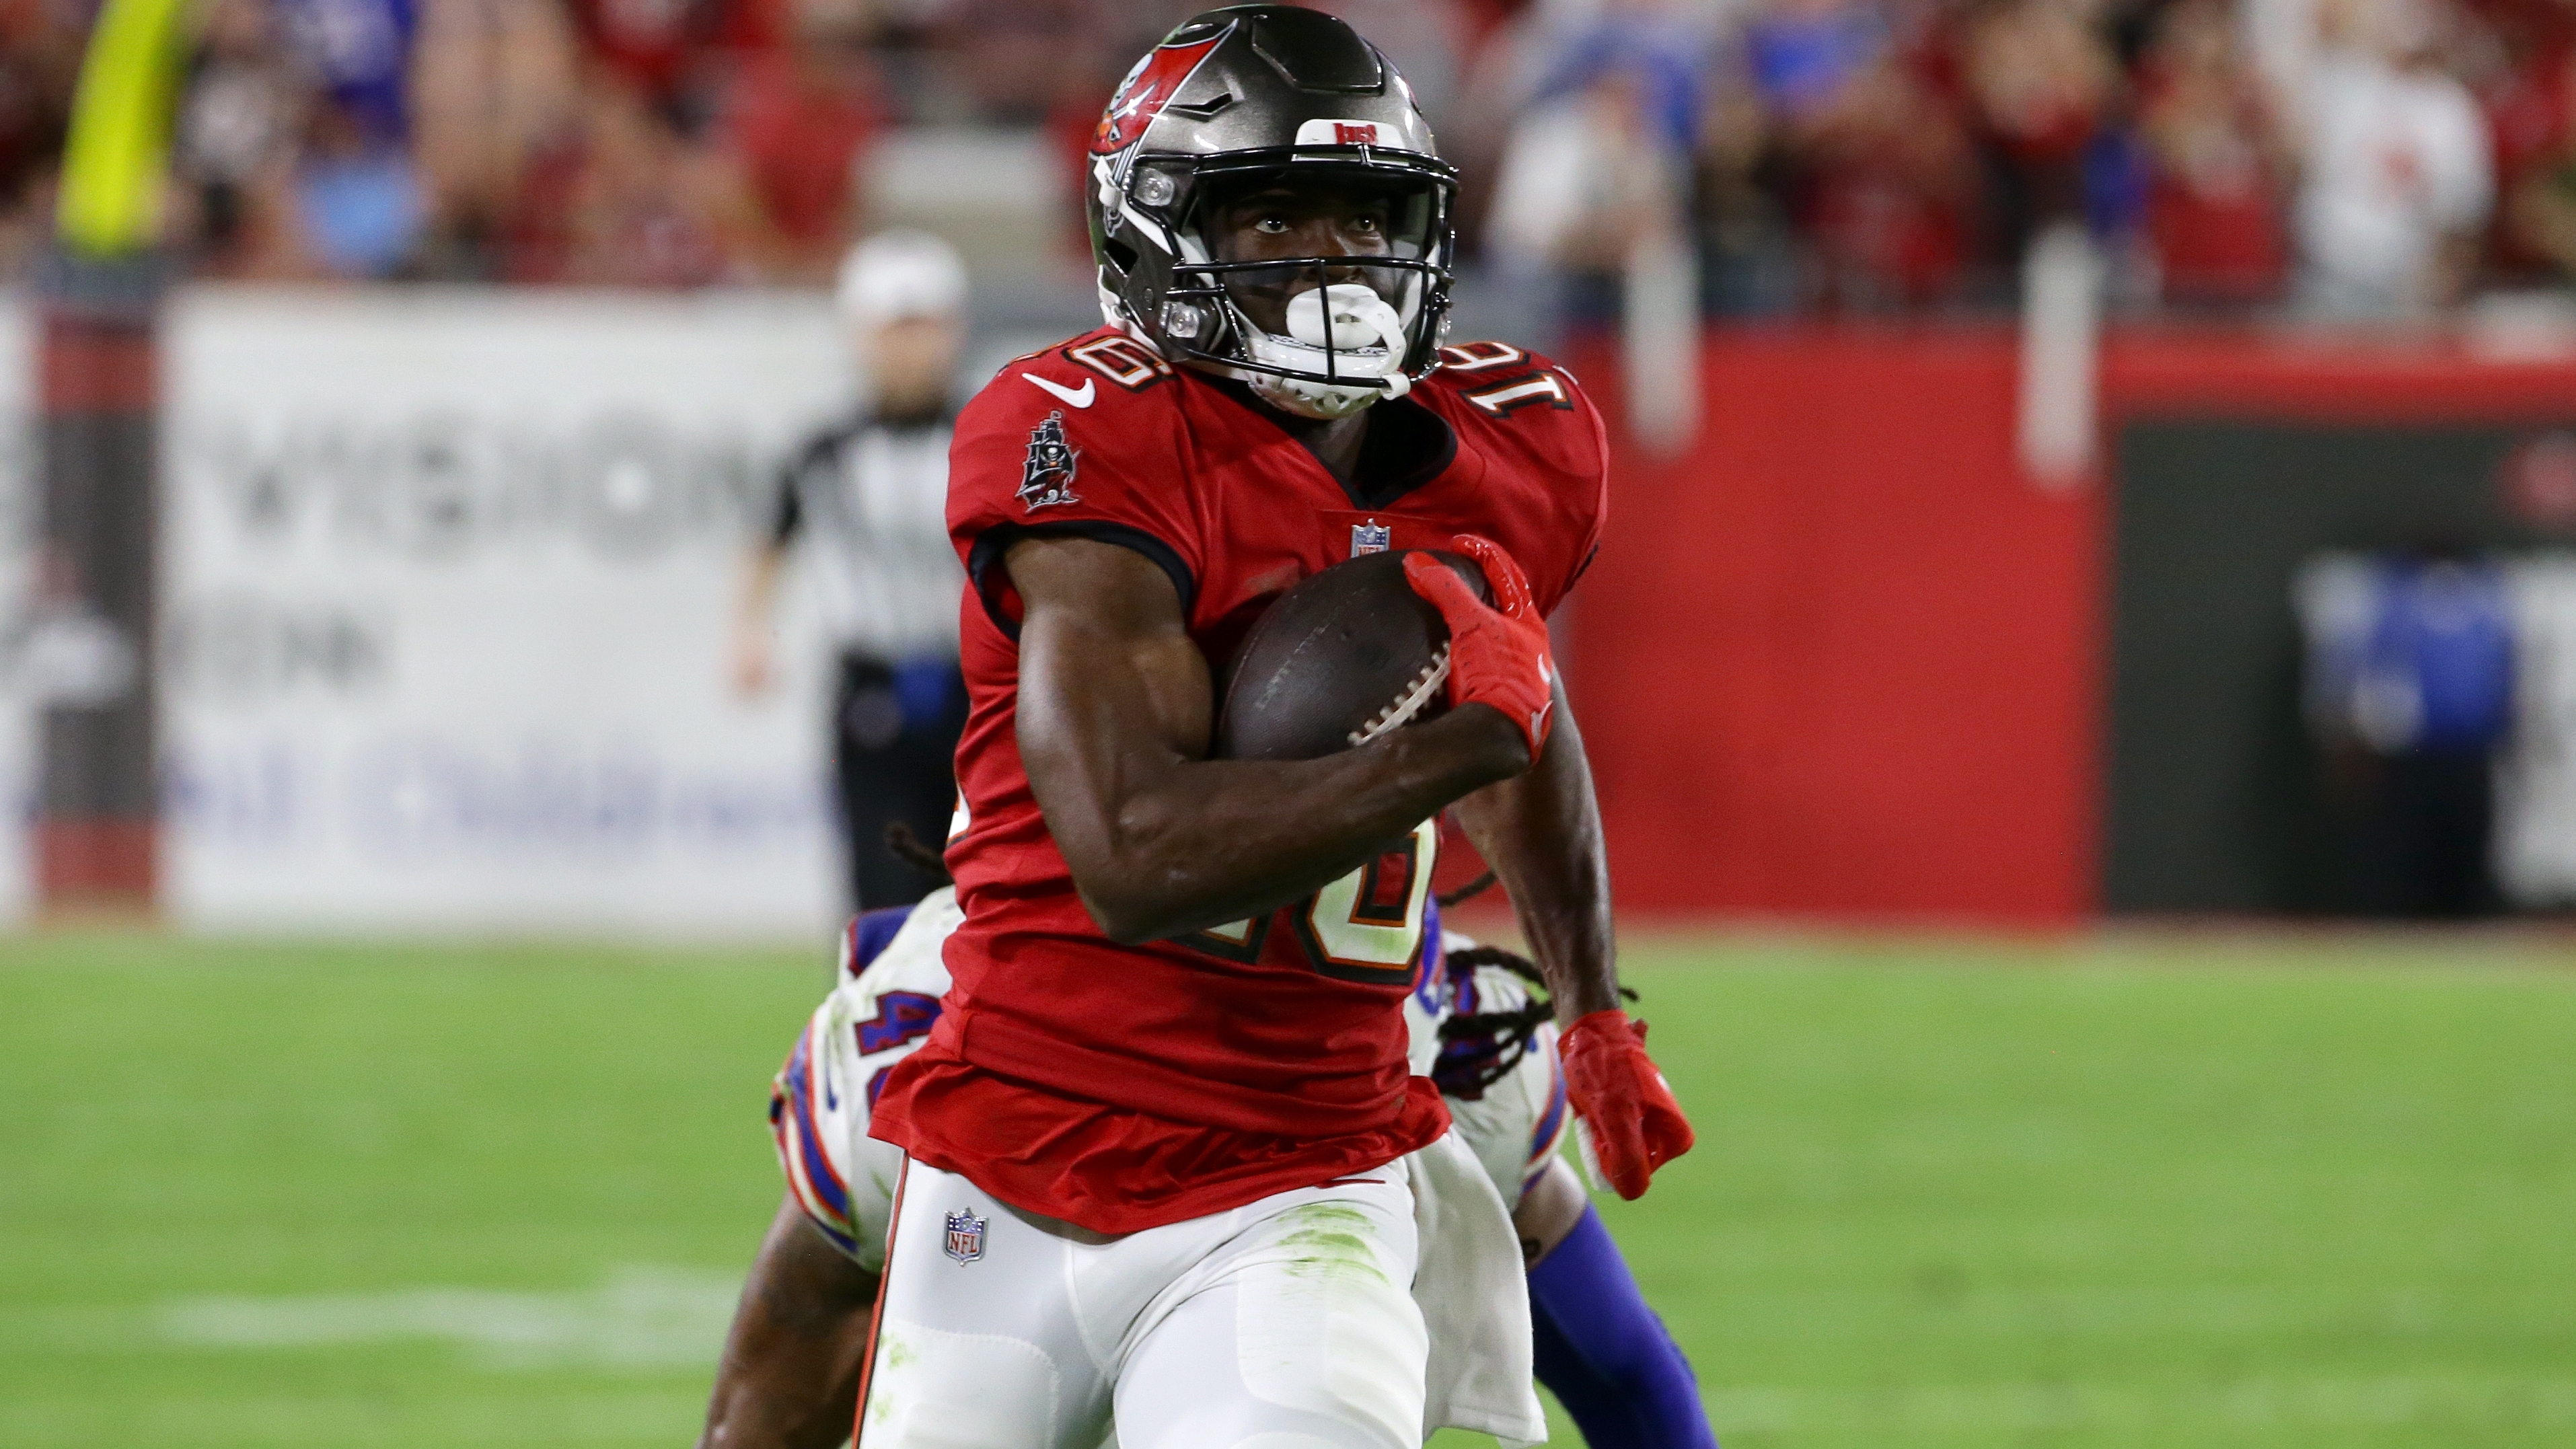 Breshad Perriman back with the Bucs on one year deal - Bucs Nation